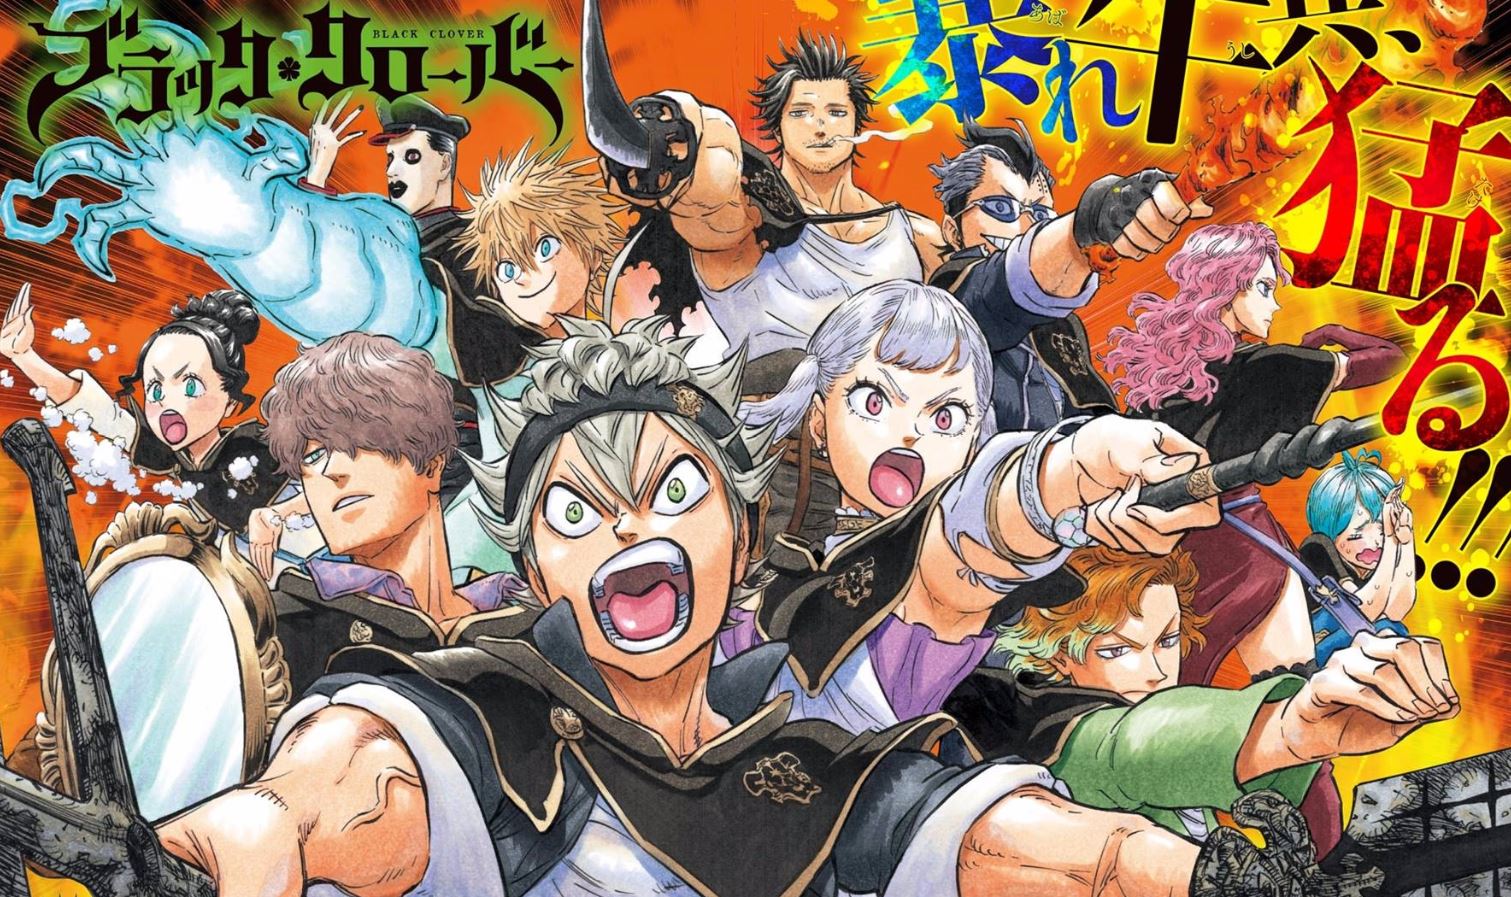 Top 10 Strongest Characters in Black Clover